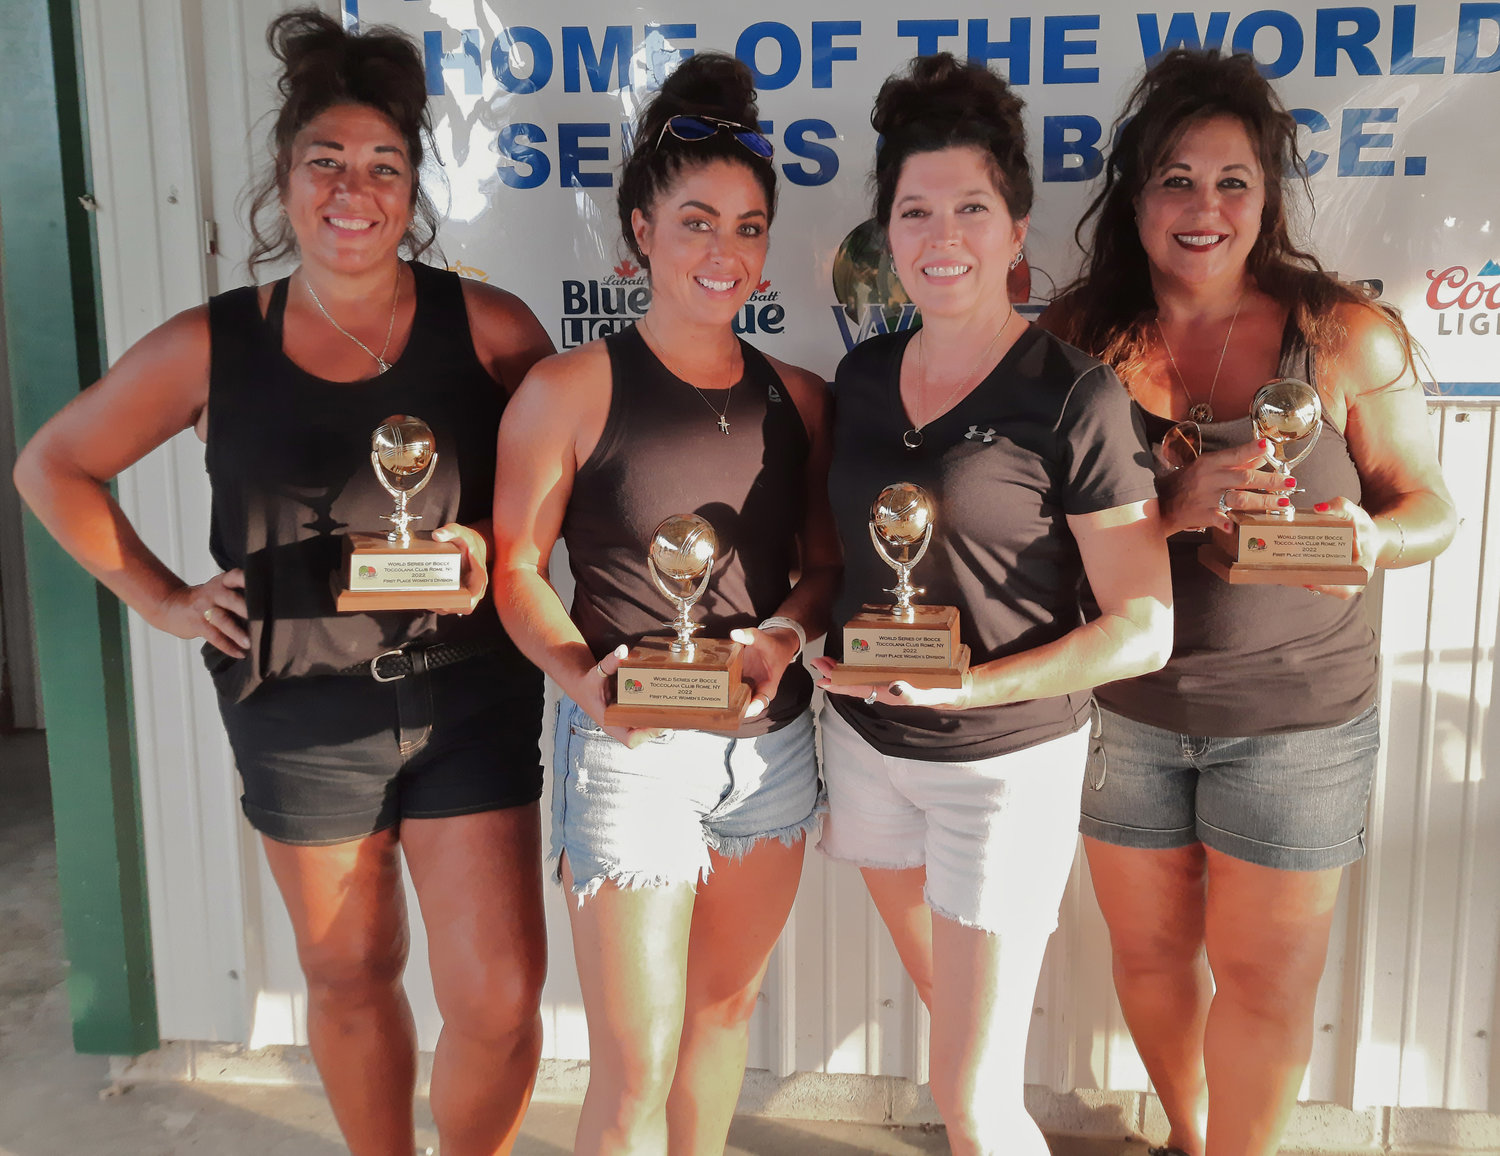 Viviani Law Firm, consisting of sisters Tammy Dimezzo, Kristin Ciotti, Robin Lanzi and Kim Luczak won the women's division of the 47th World Series of Bocce Sunday at sun-drenched Toccolana Club in Rome. Pictured is Viviani Law Firm, holding their trophies.